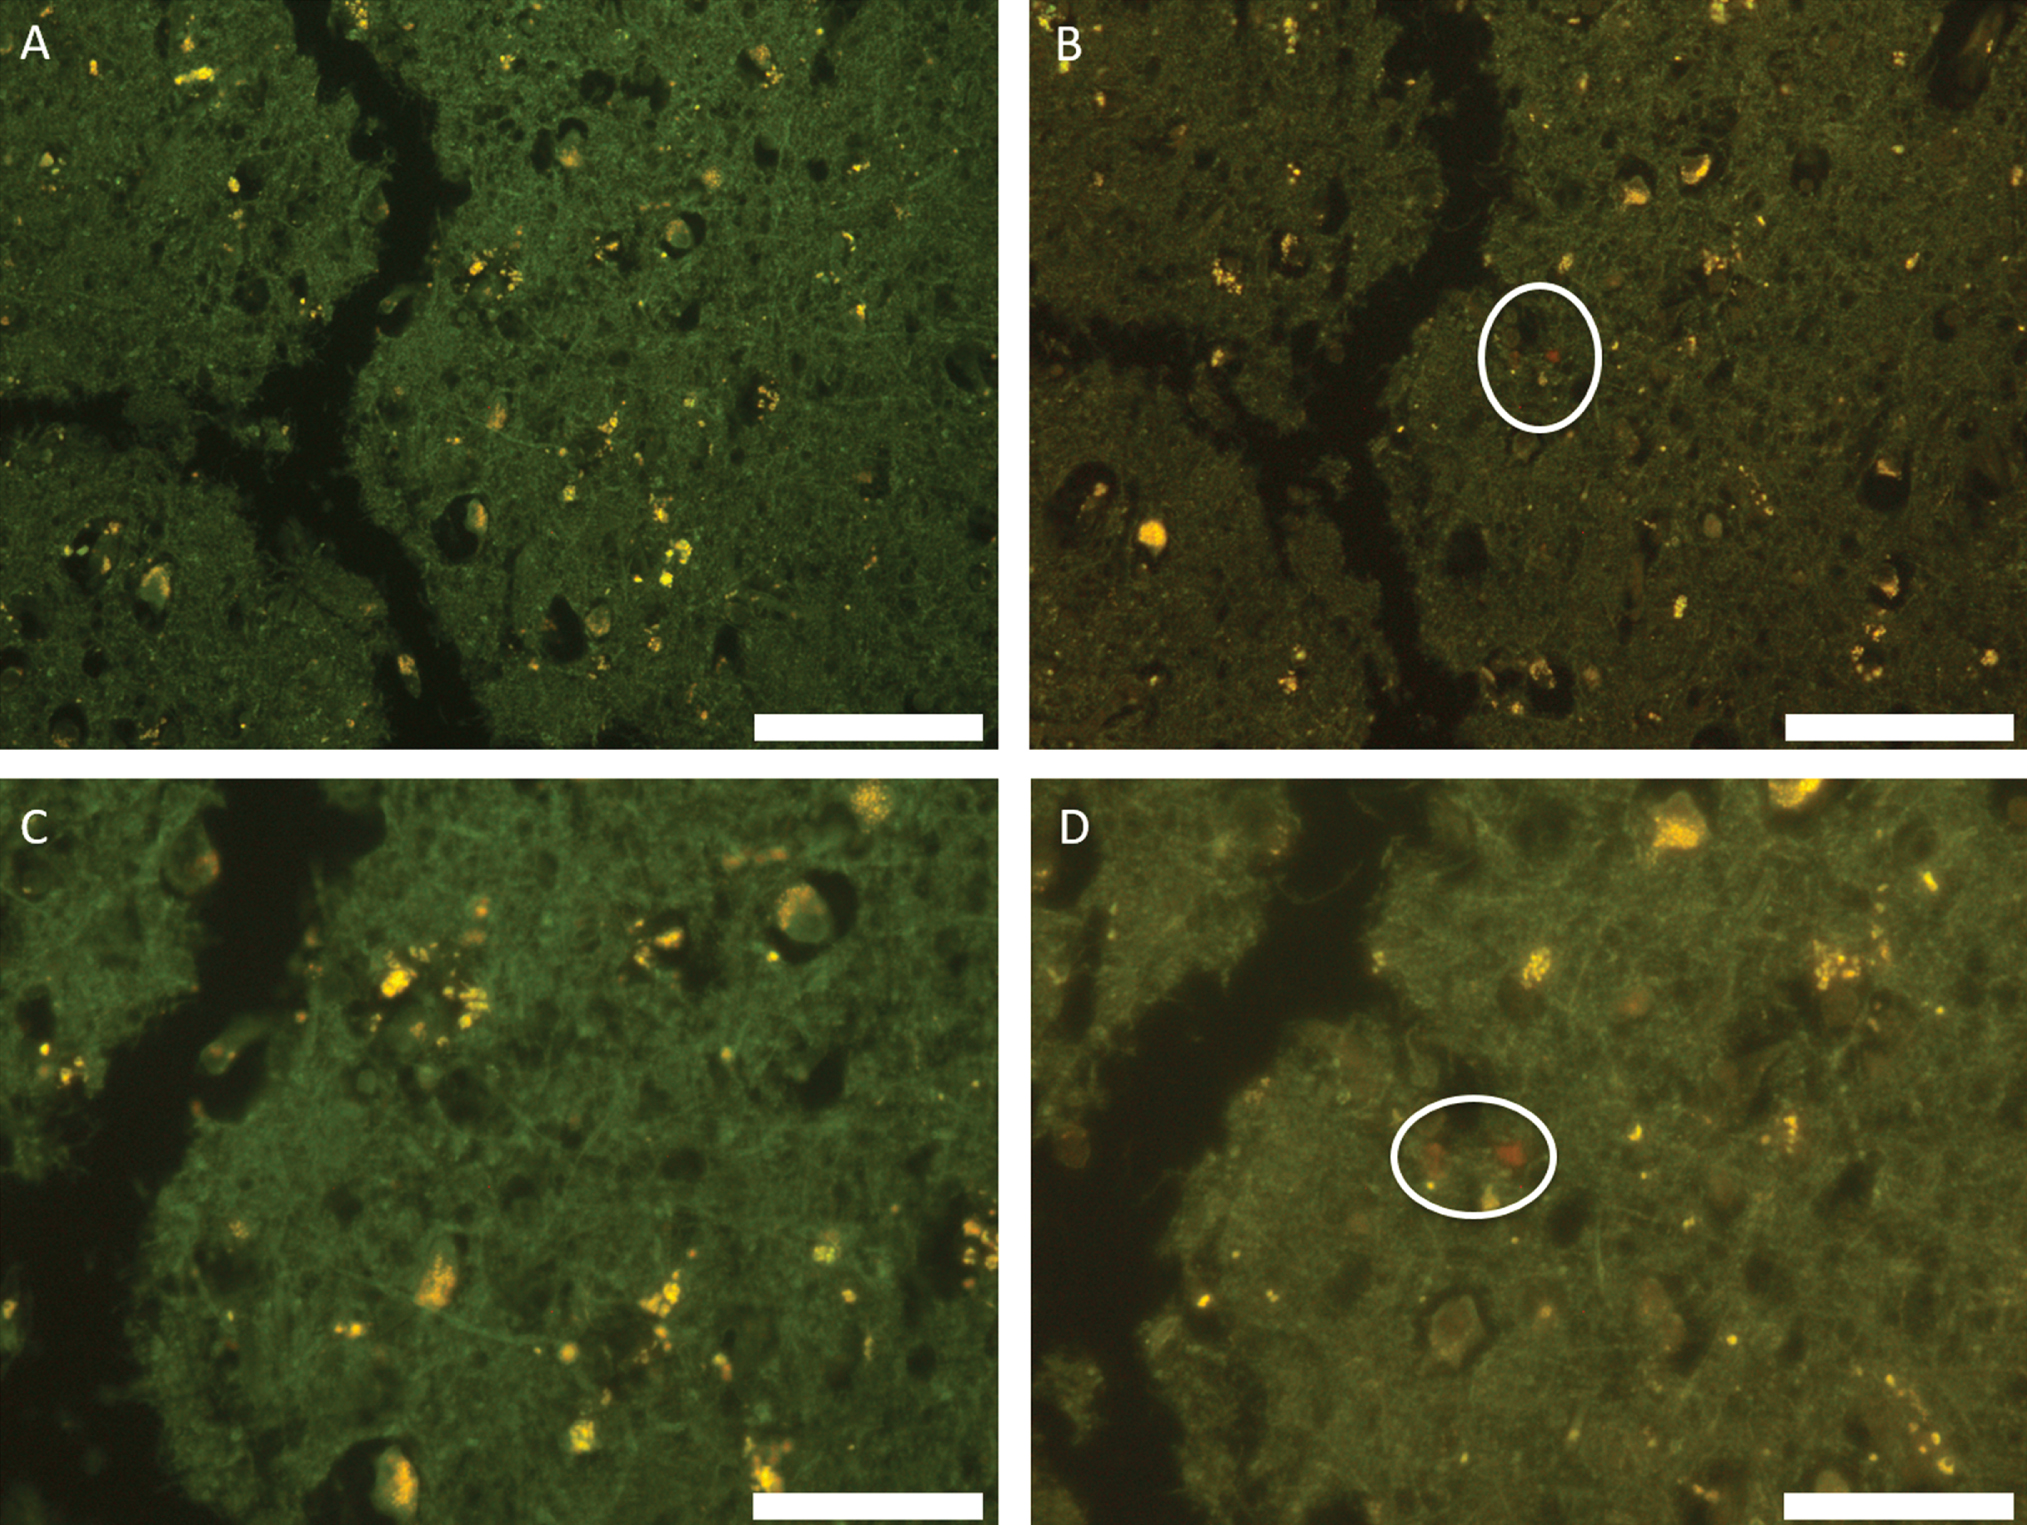 Autofluorescence (A, C) and fluorescence (B, D) images of temporal lobe stained with lumogallion. Deposits of aluminum showing strong positive fluorescence are circled. Scale bar is 100 μm (A, B) and 50 μm (C, D).